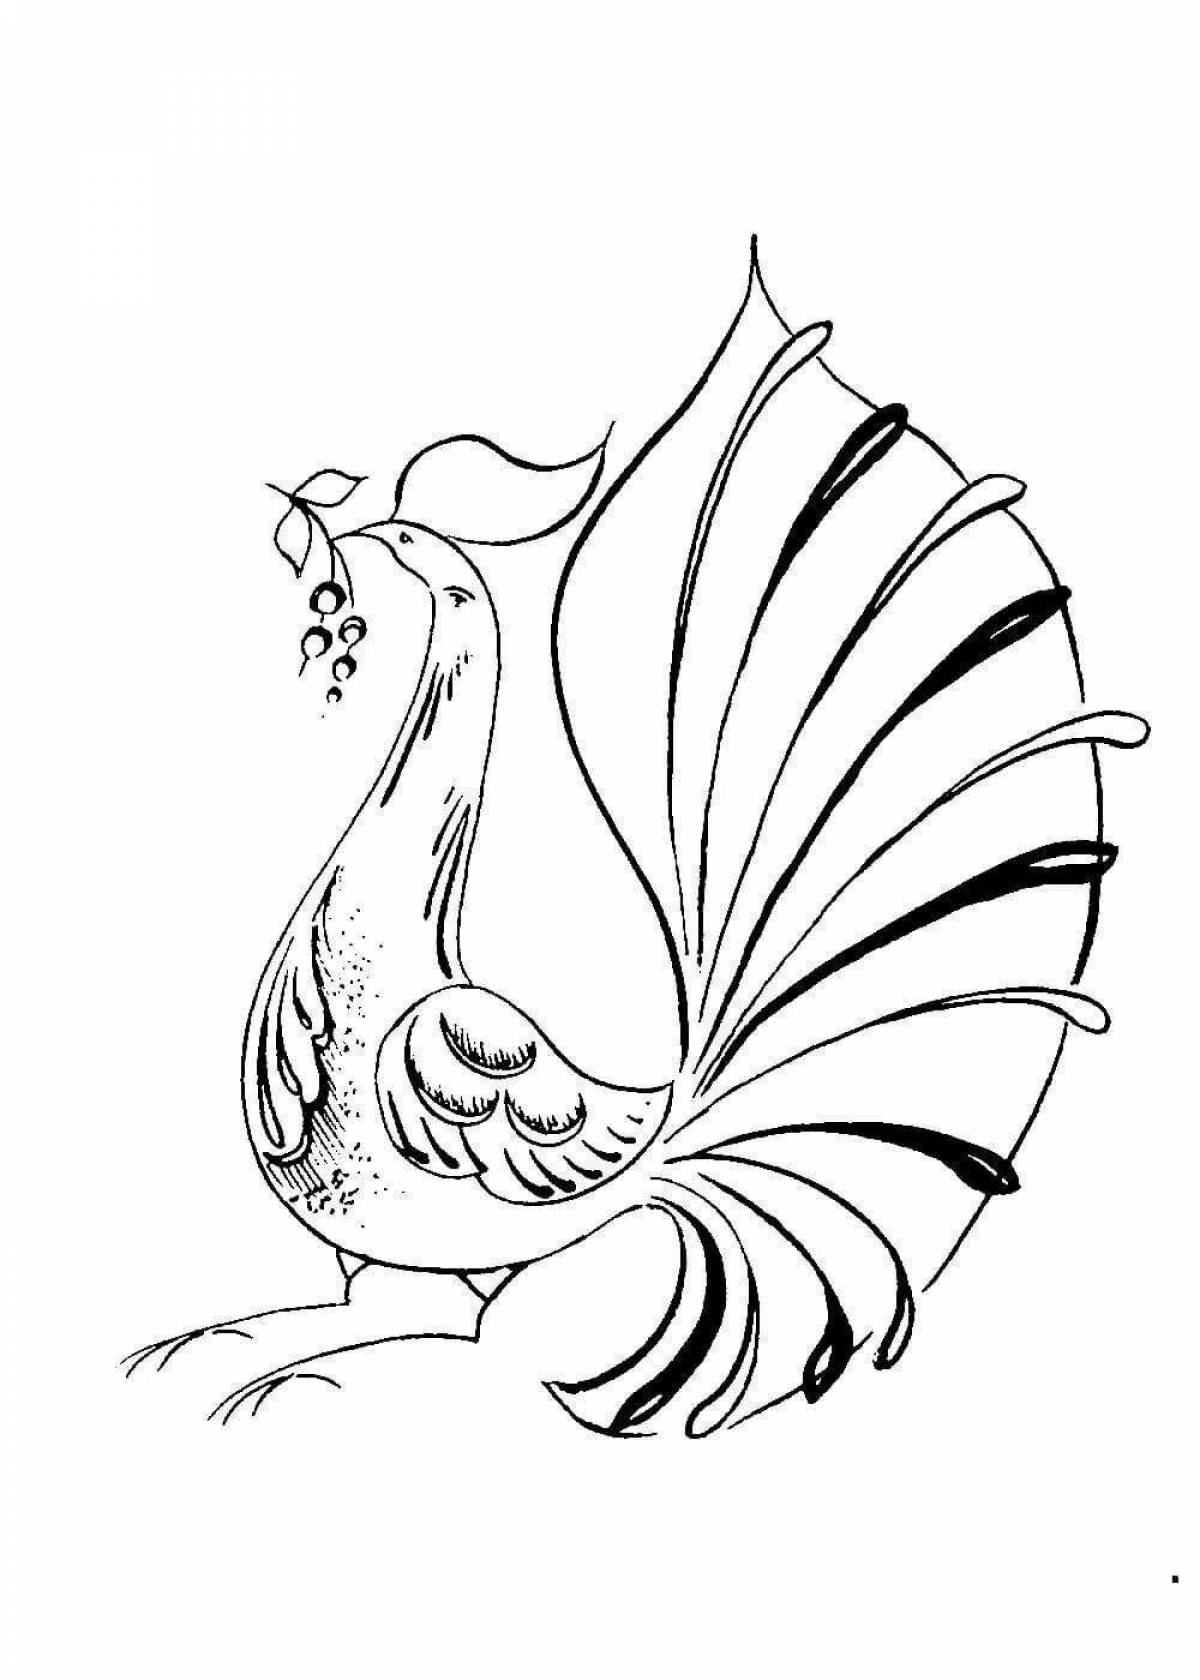 Exciting wood chip coloring page